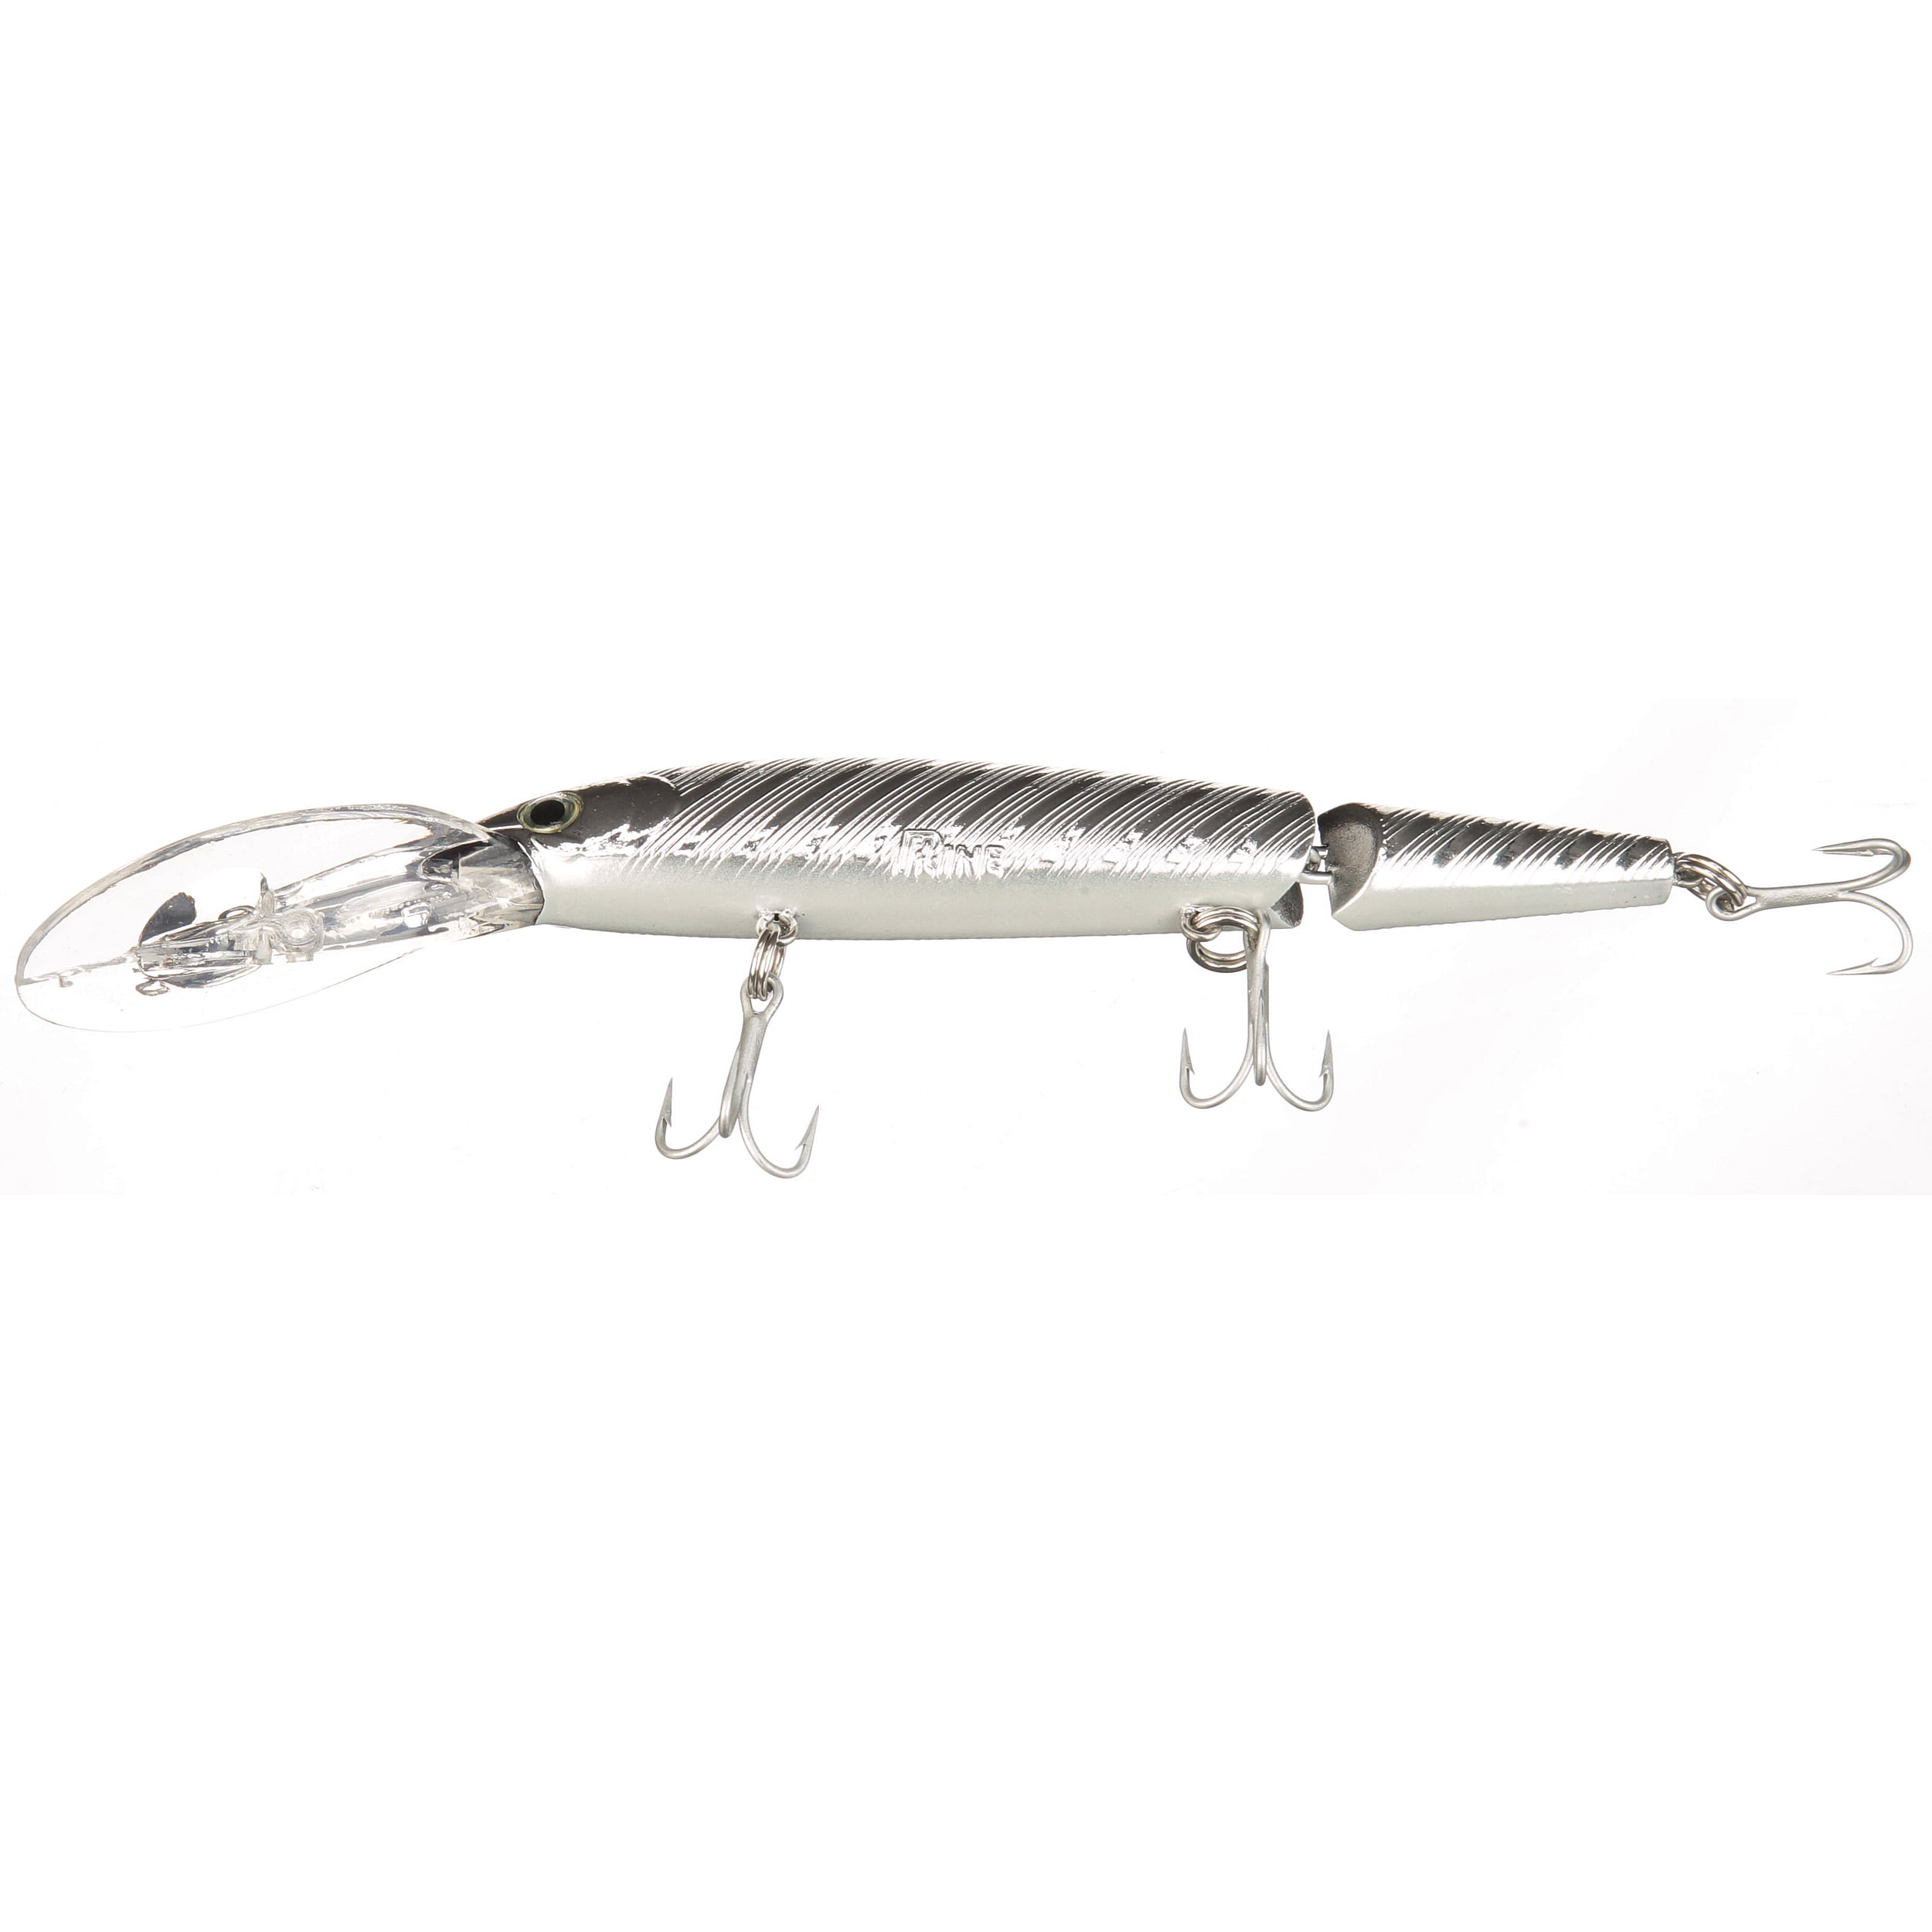 P-Line Angry Eye Predator Jointed Minnow Bait 6-1/2 Qty 1